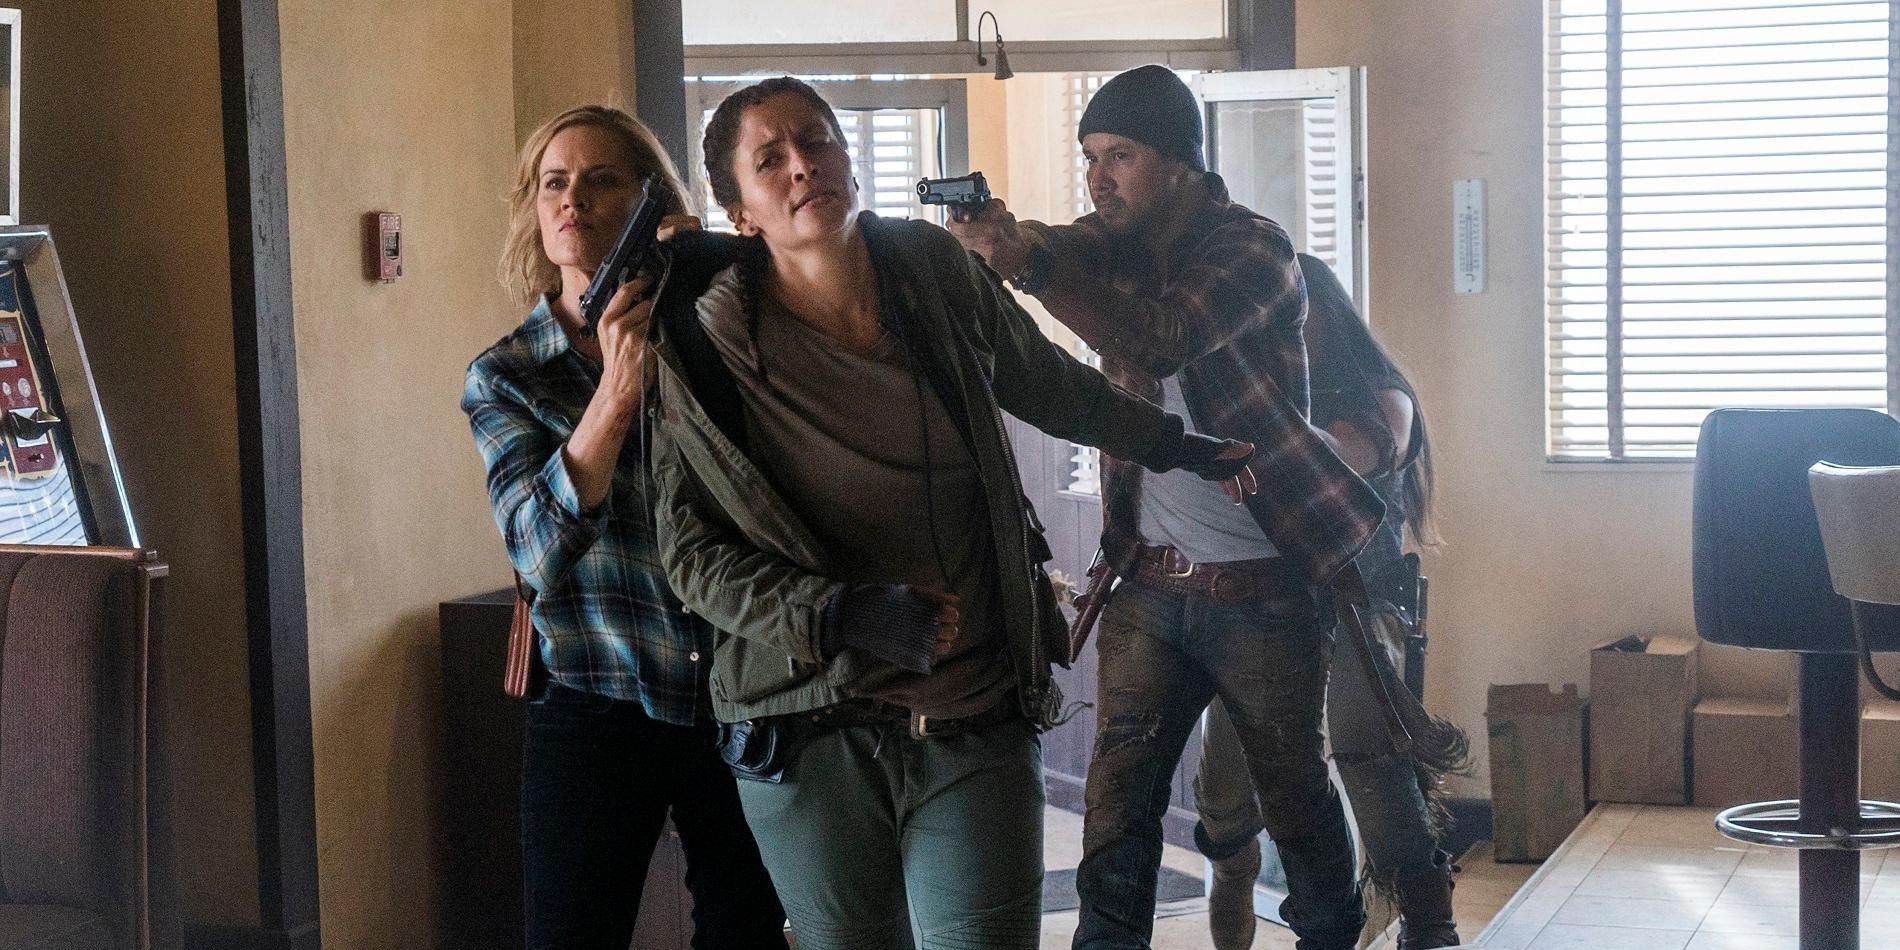 Could Madison Be Fear The Walking Dead’s Negan?